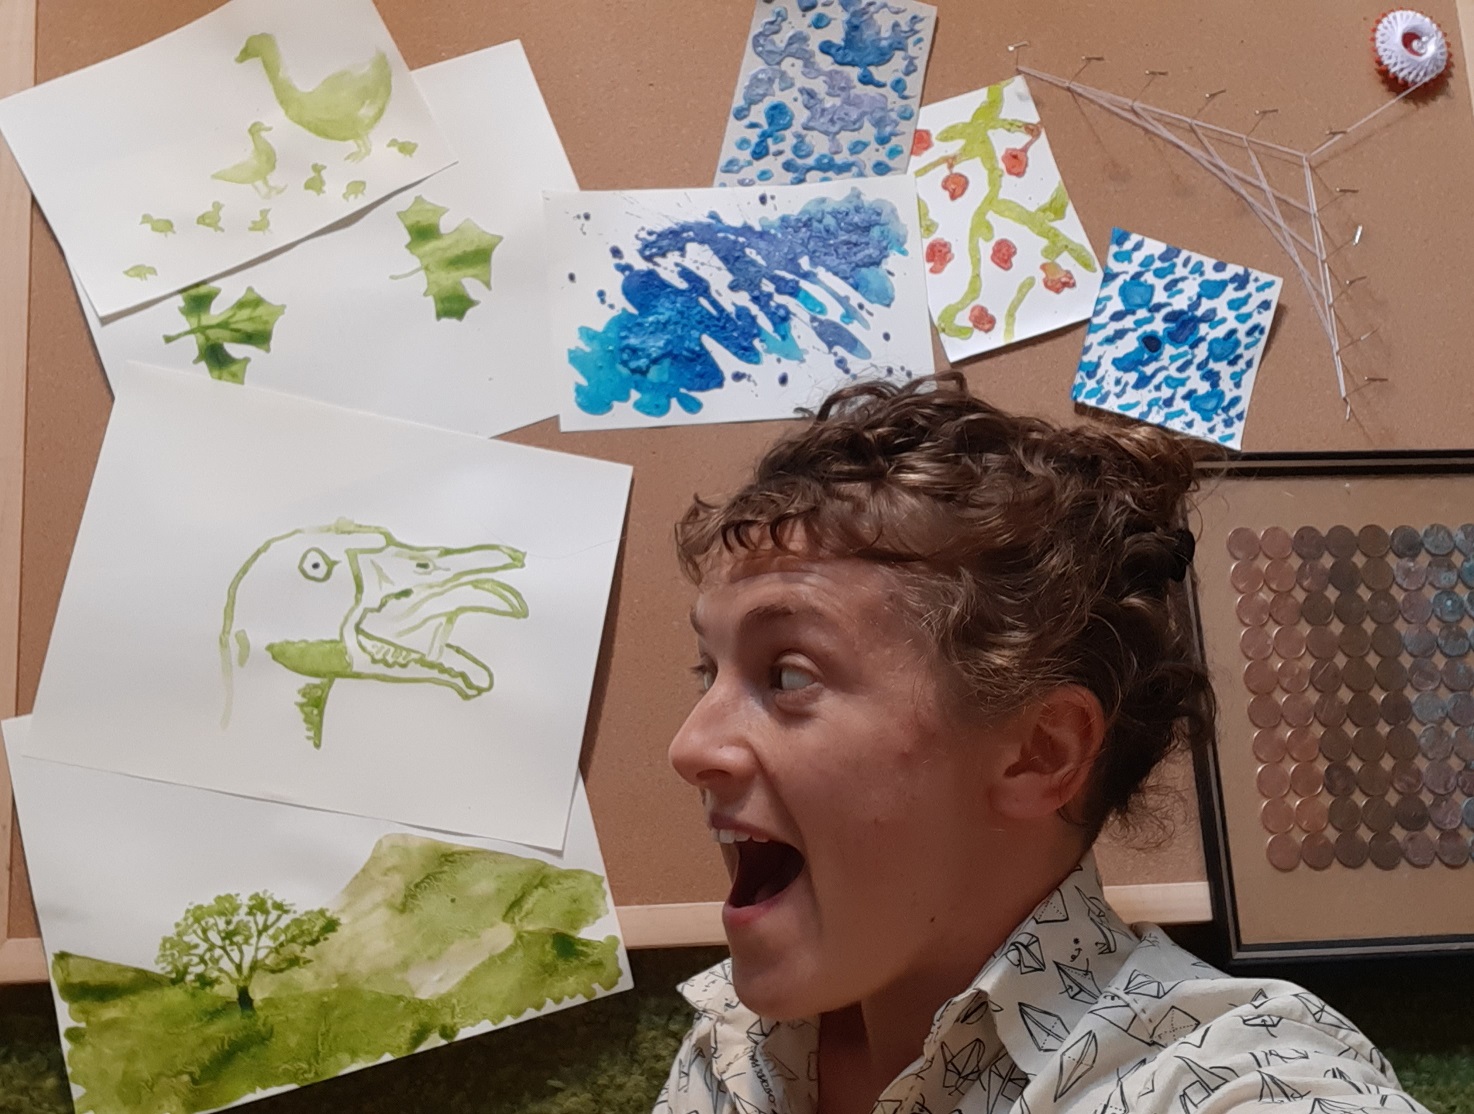 Your course instructor, a white woman in her 30s with curly hair wearing a shirt with an origami print, is in front of a collection of pieces of artworks including a painting of a goose, whose expression she is imitating.